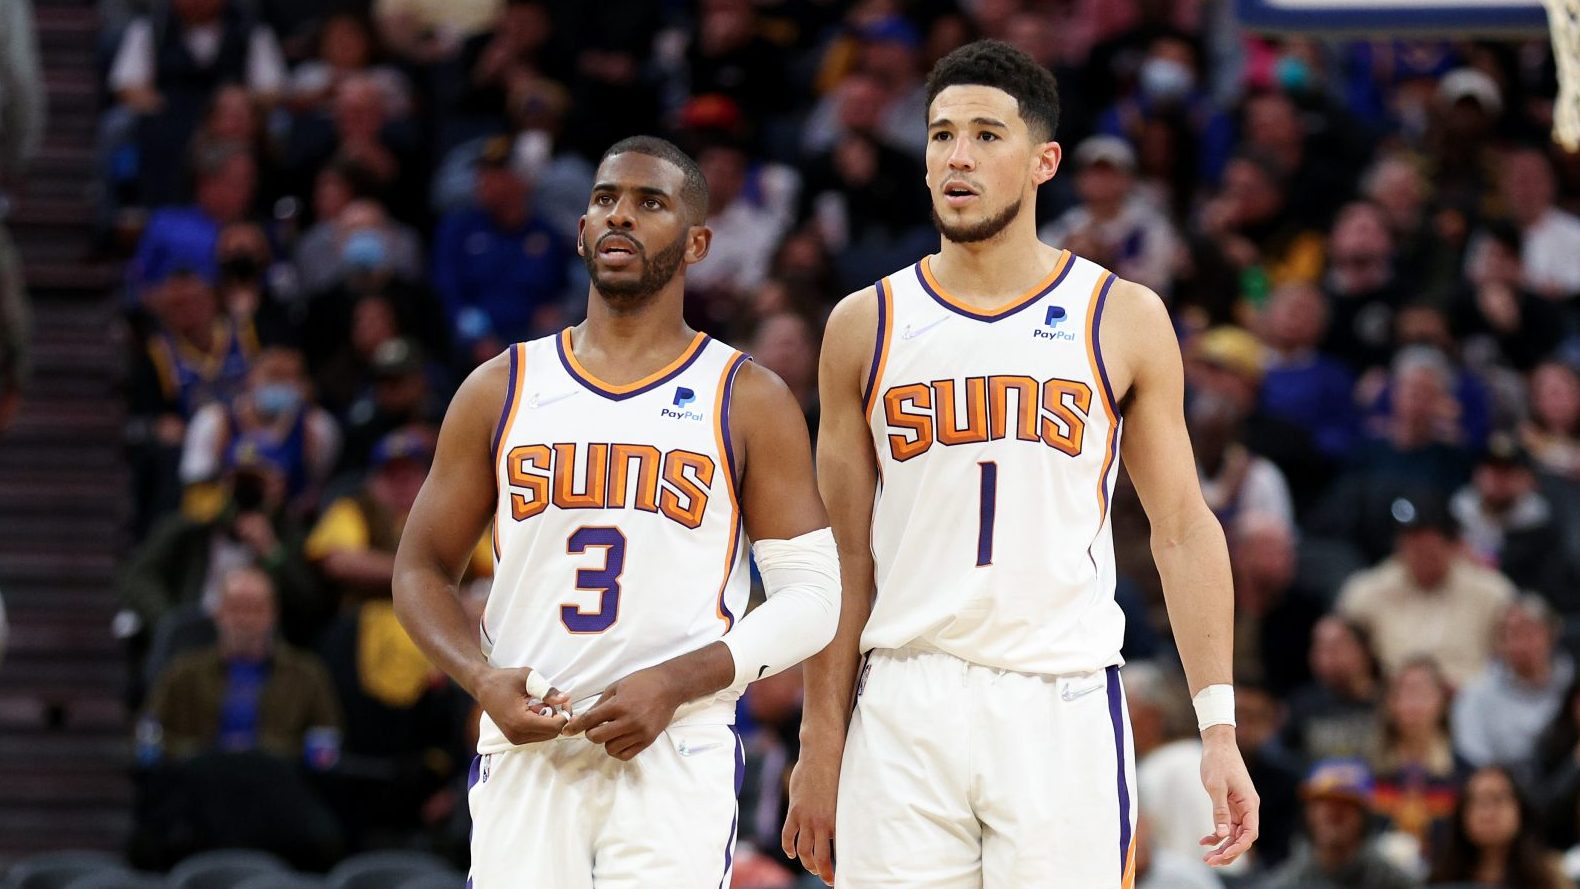 Chris Paul #3 and Devin Booker #1 of the Phoenix Suns stand on the court during their game against ...